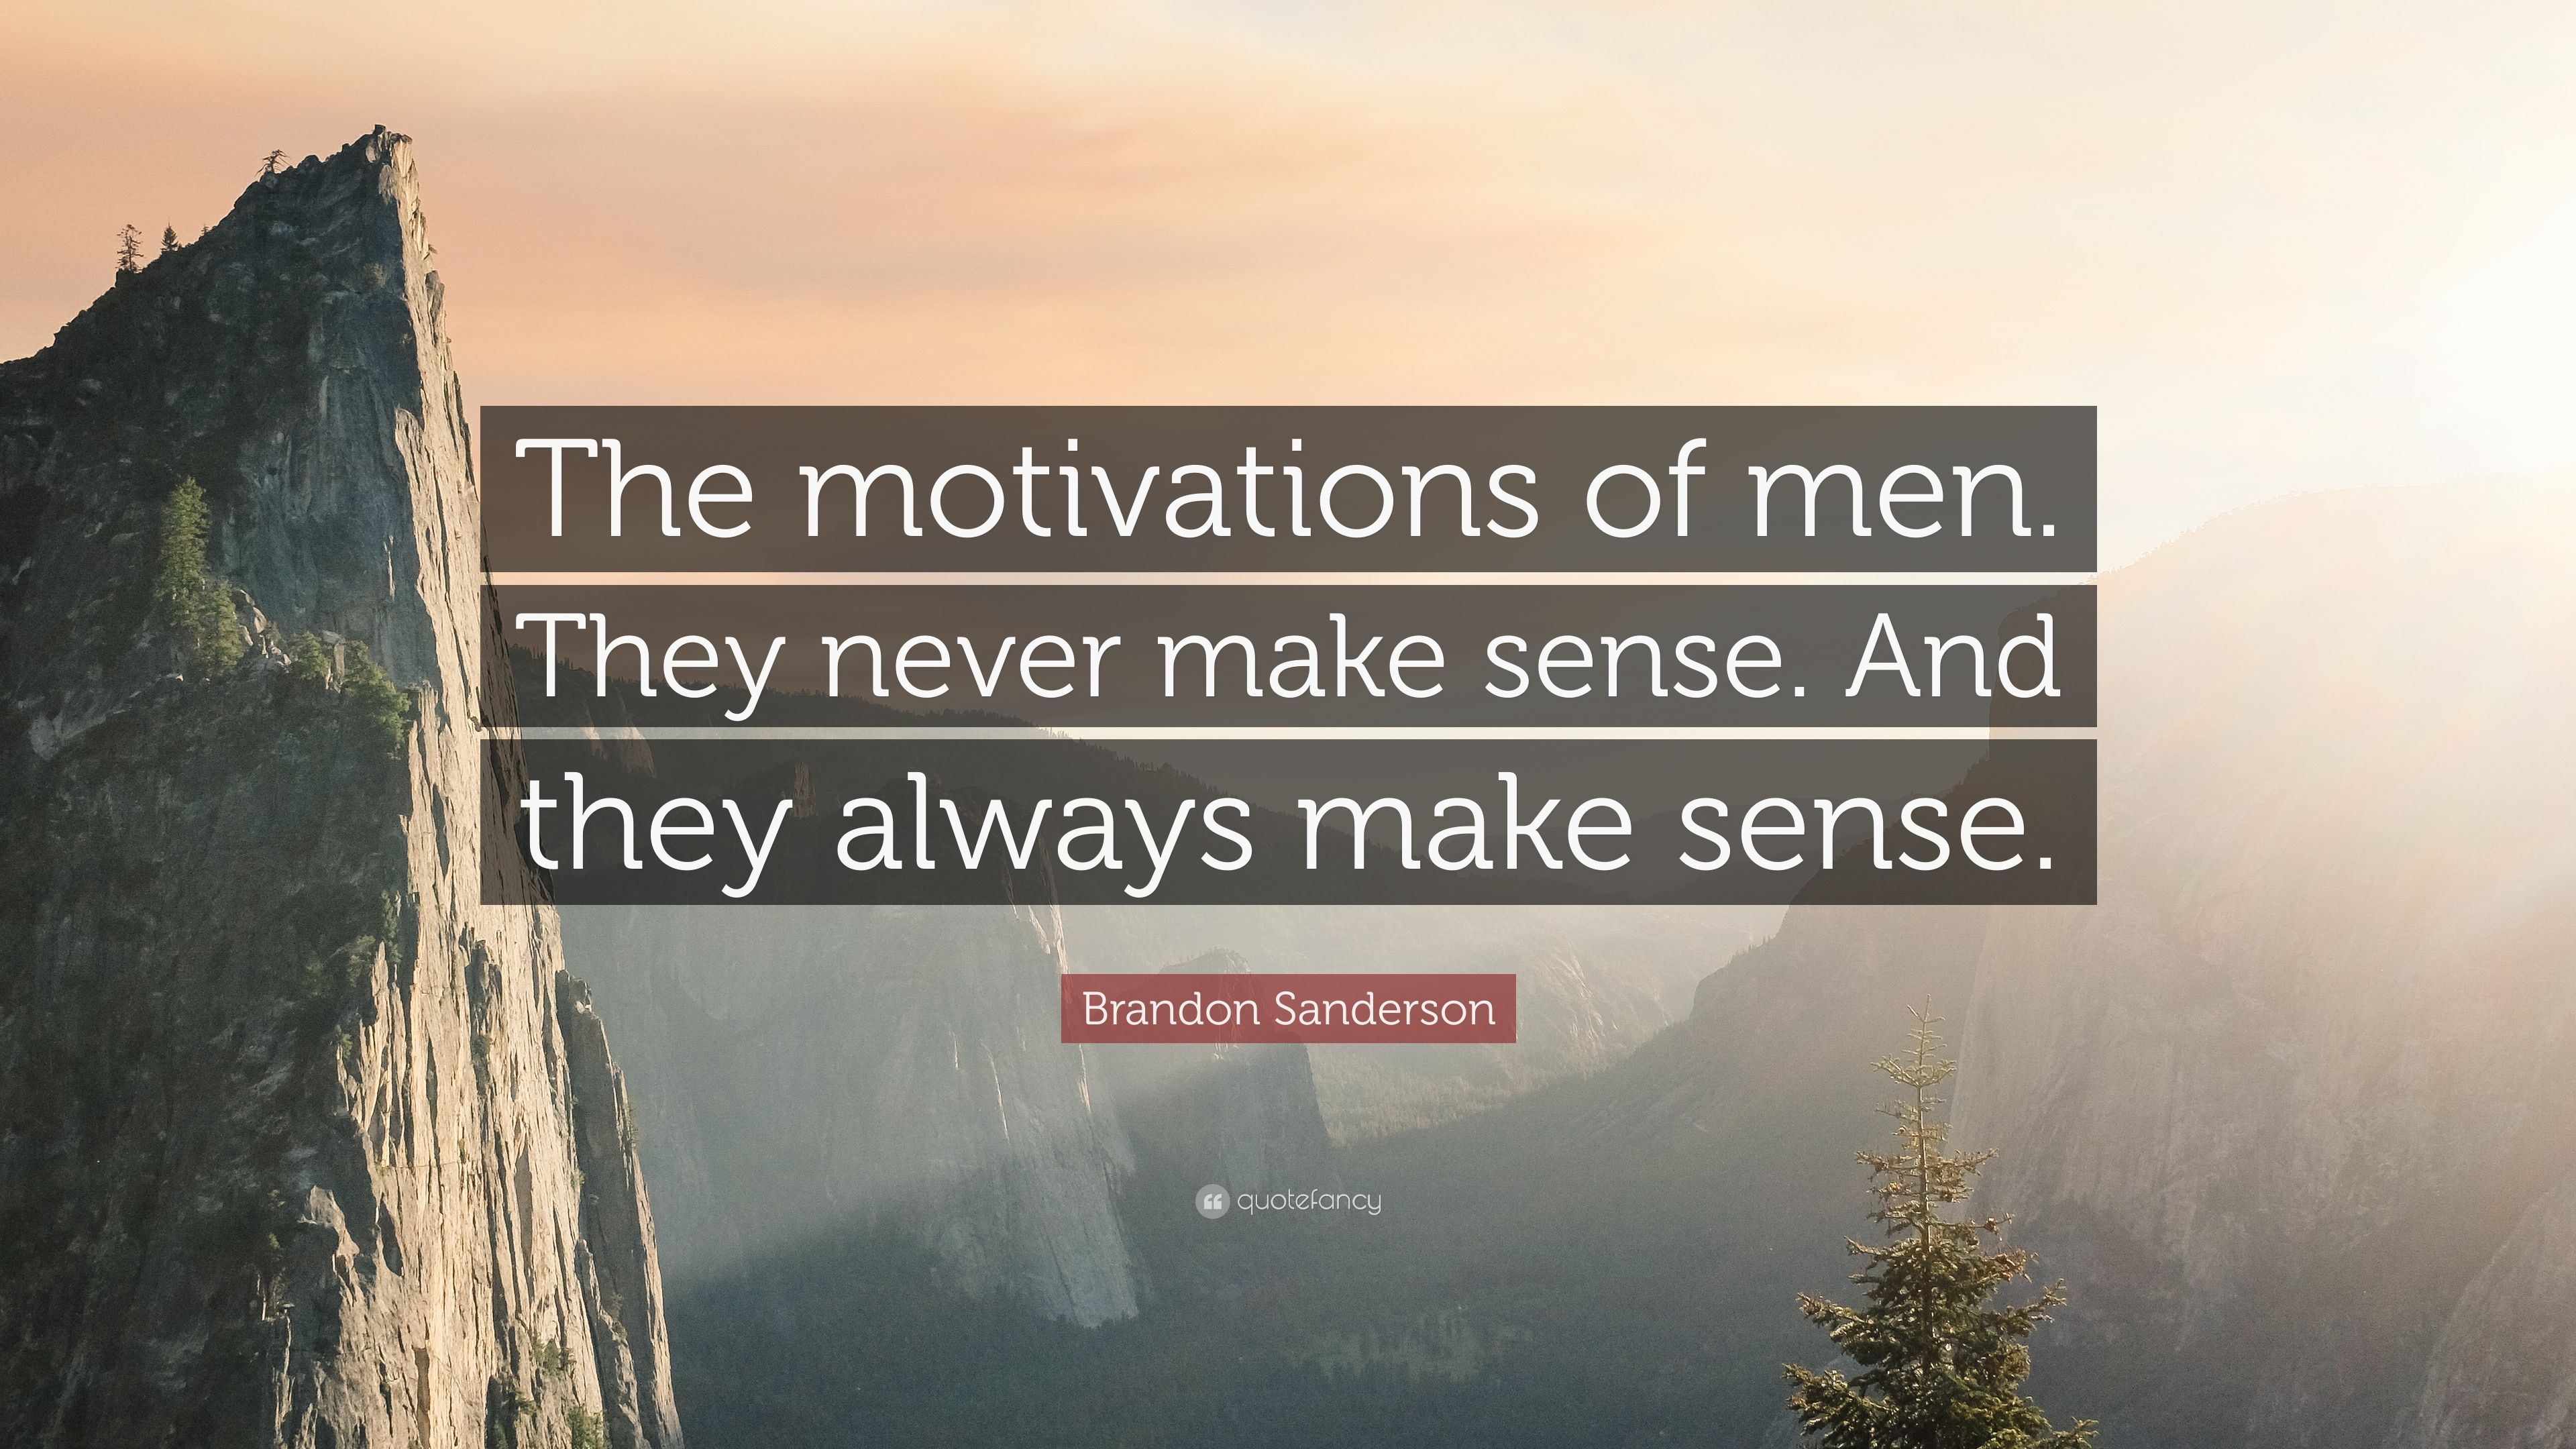 Brandon Sanderson Quote: “The motivations of men. They never make sense. And they always make sense.” (10 wallpaper)